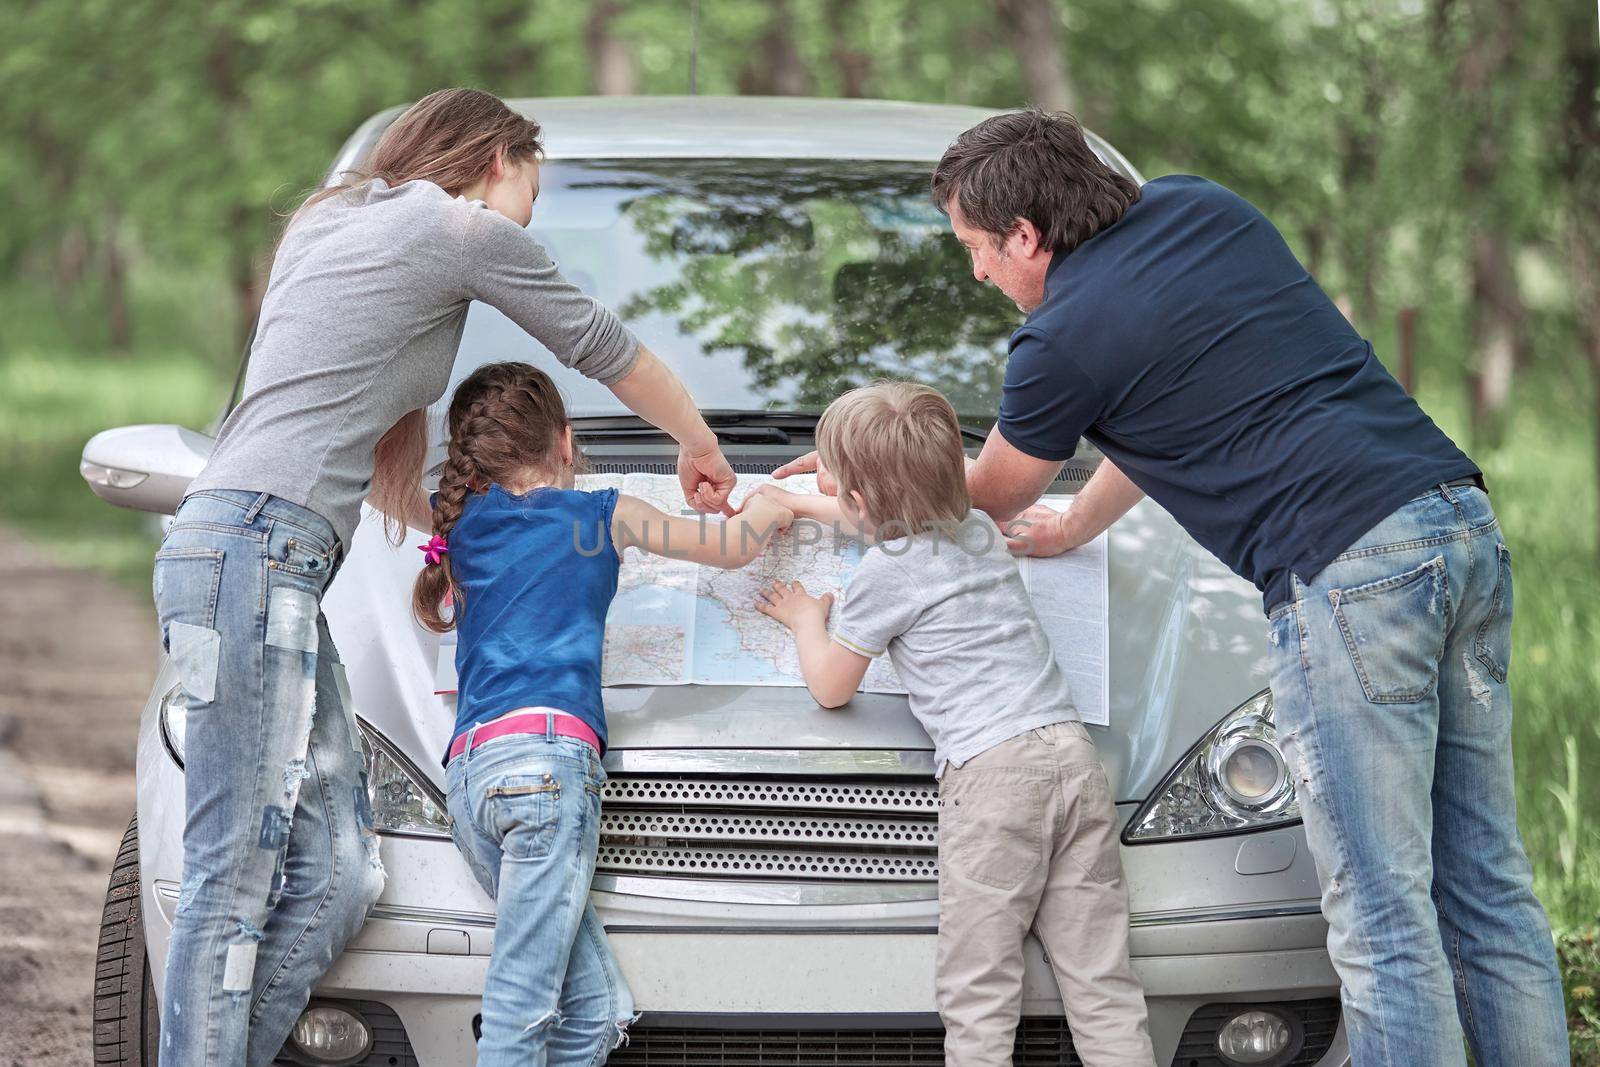 family with children standing near the faulty car . adventures on the road